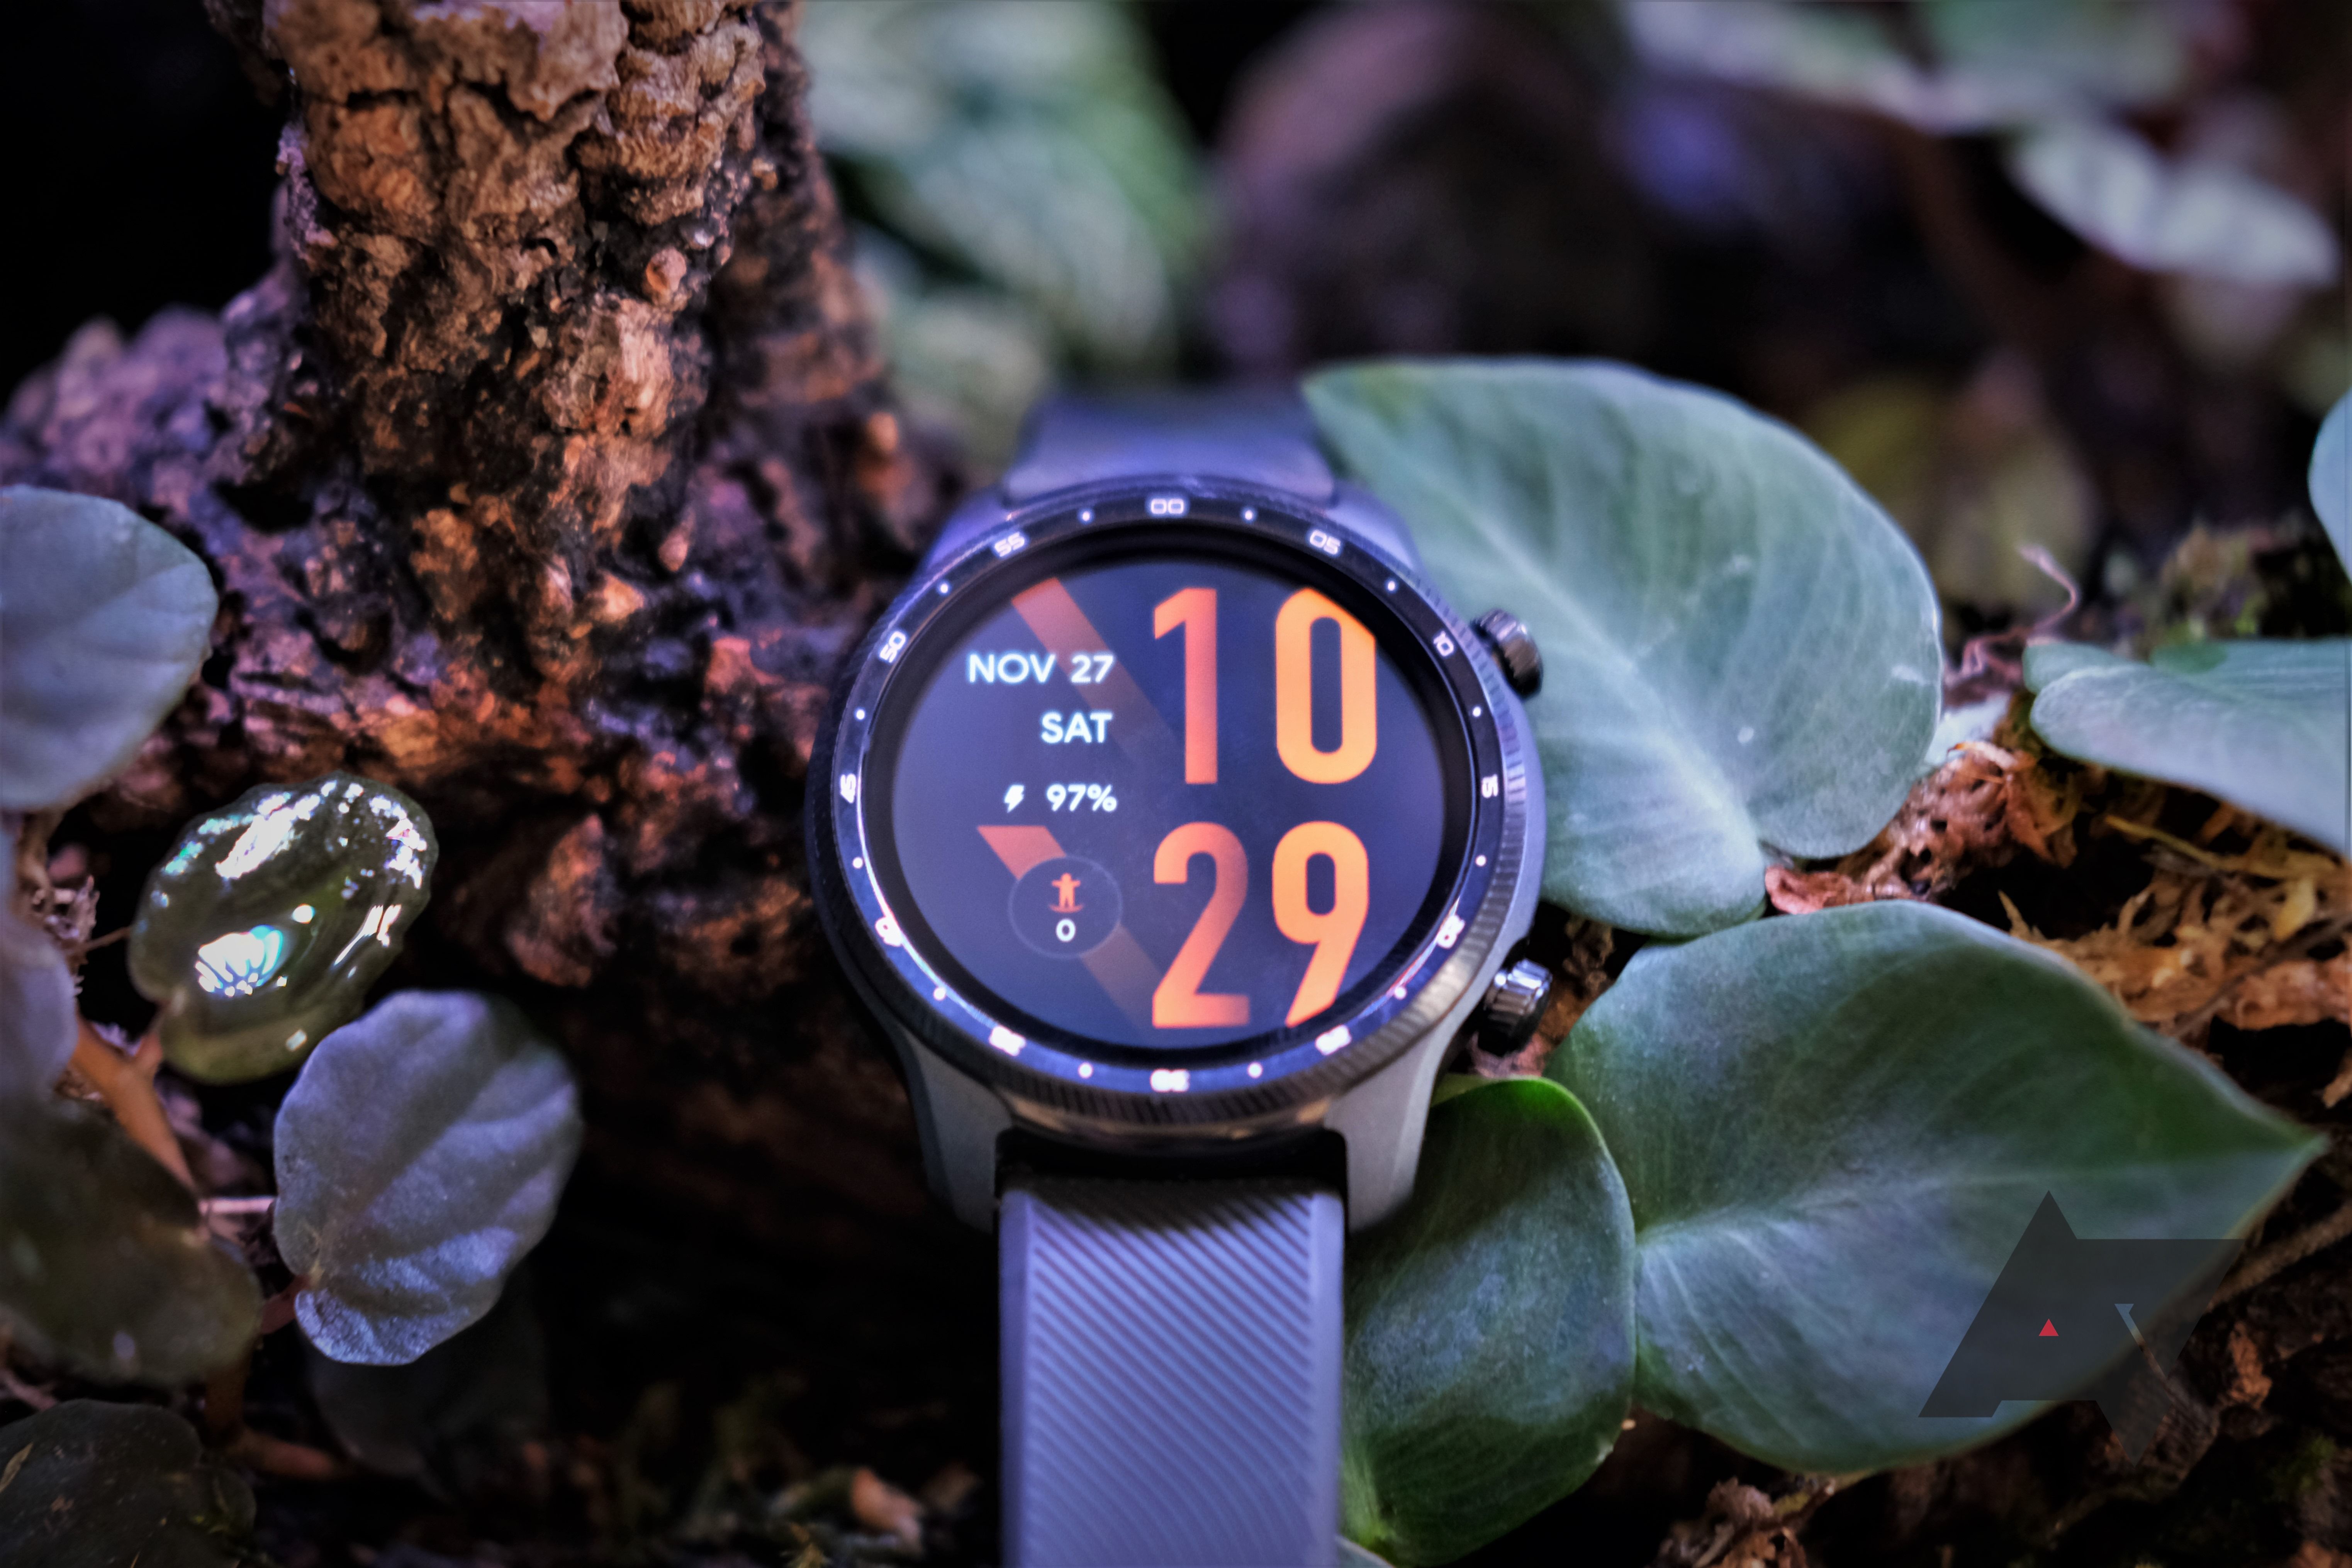 TicWatch Pro 3 Review - The Smartwatch Upgrade That Wear OS Needs